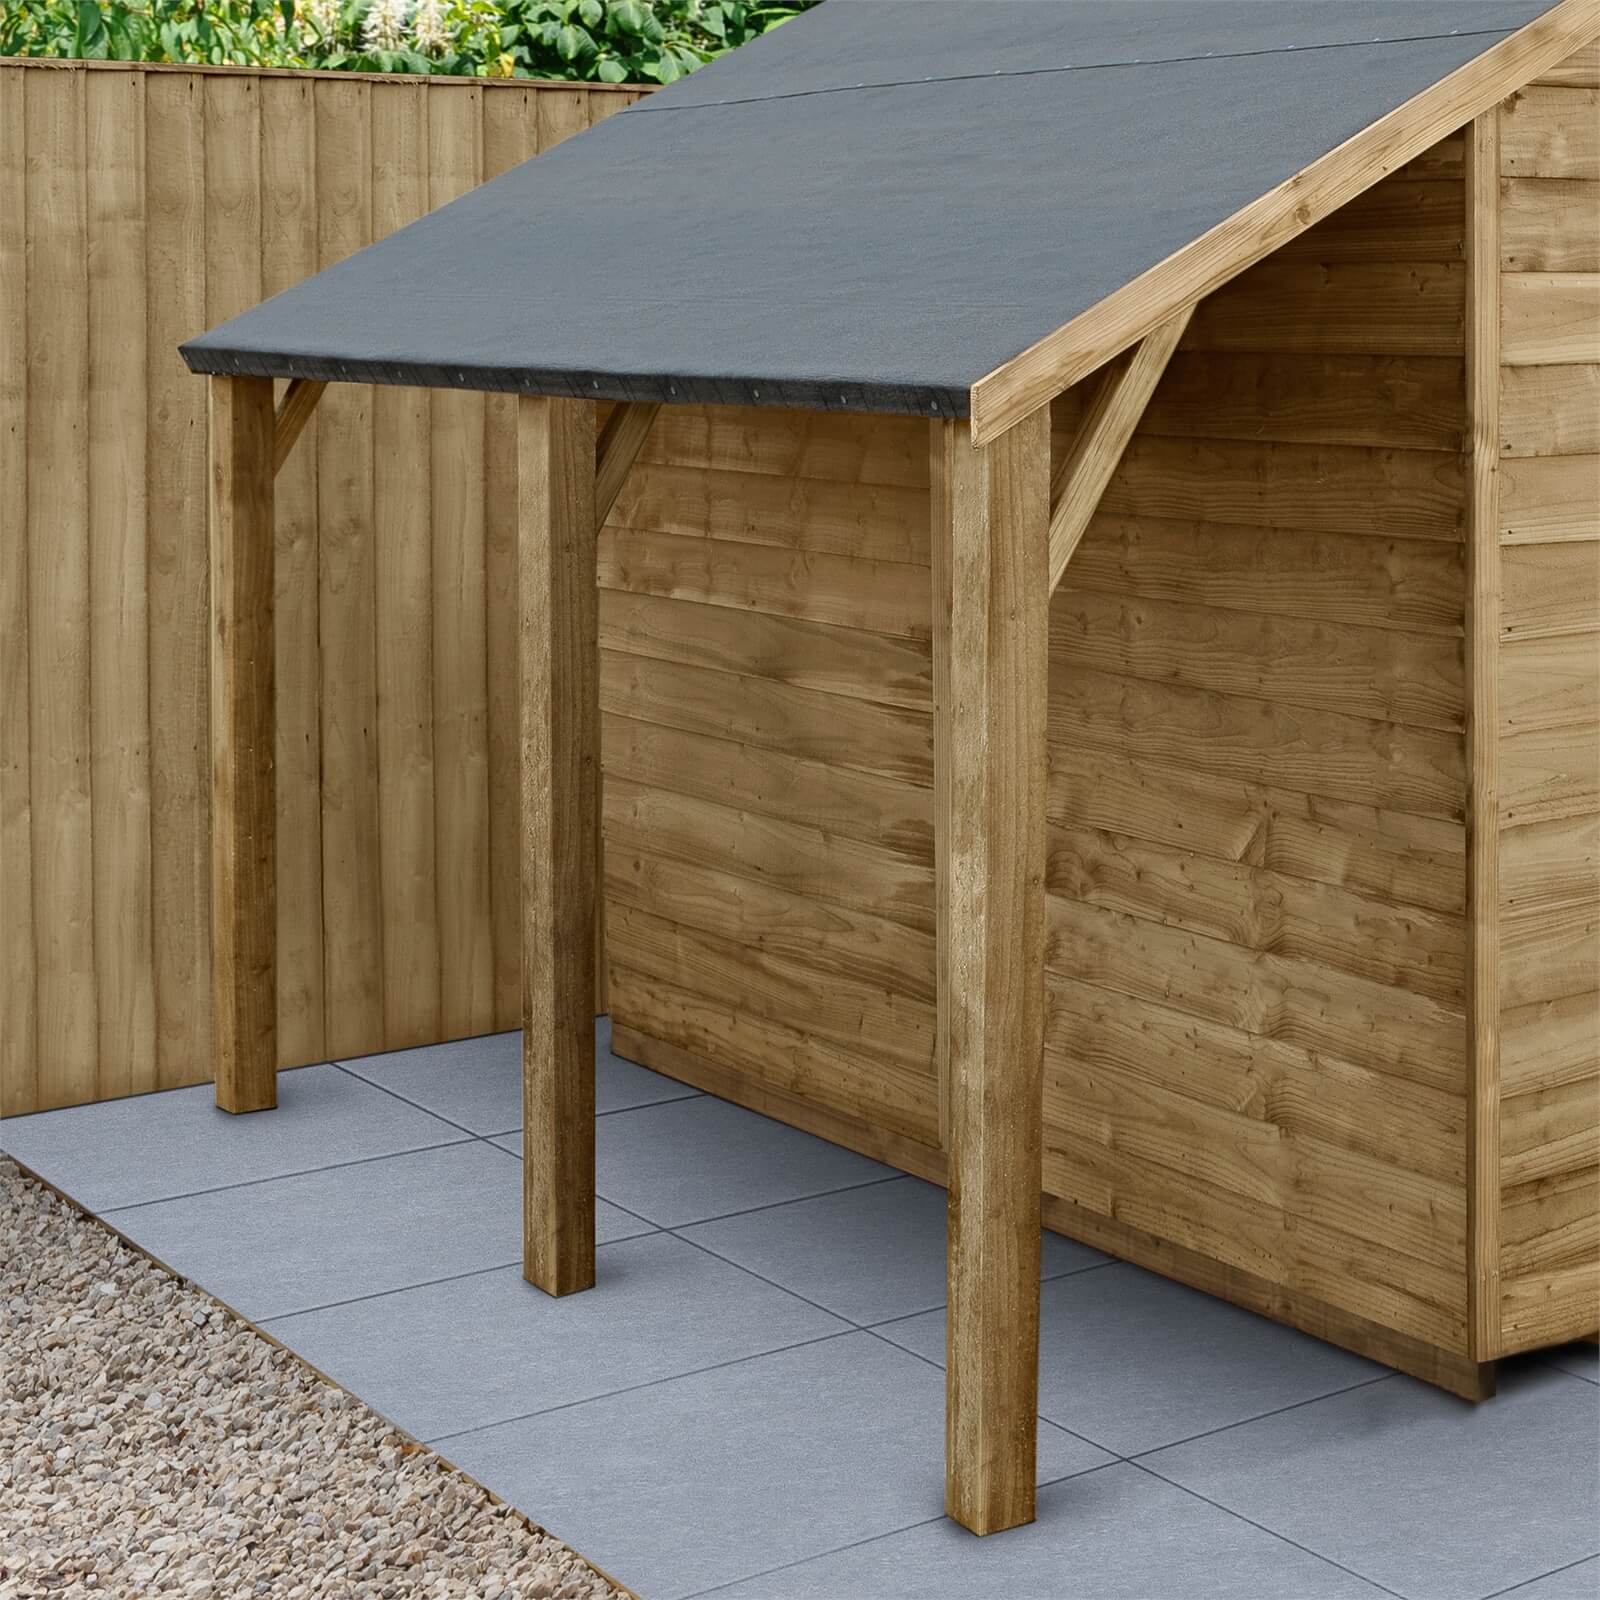 Forest Lean To Shed Kit for 7 x 5ft Overlap Pressure Treated Shed